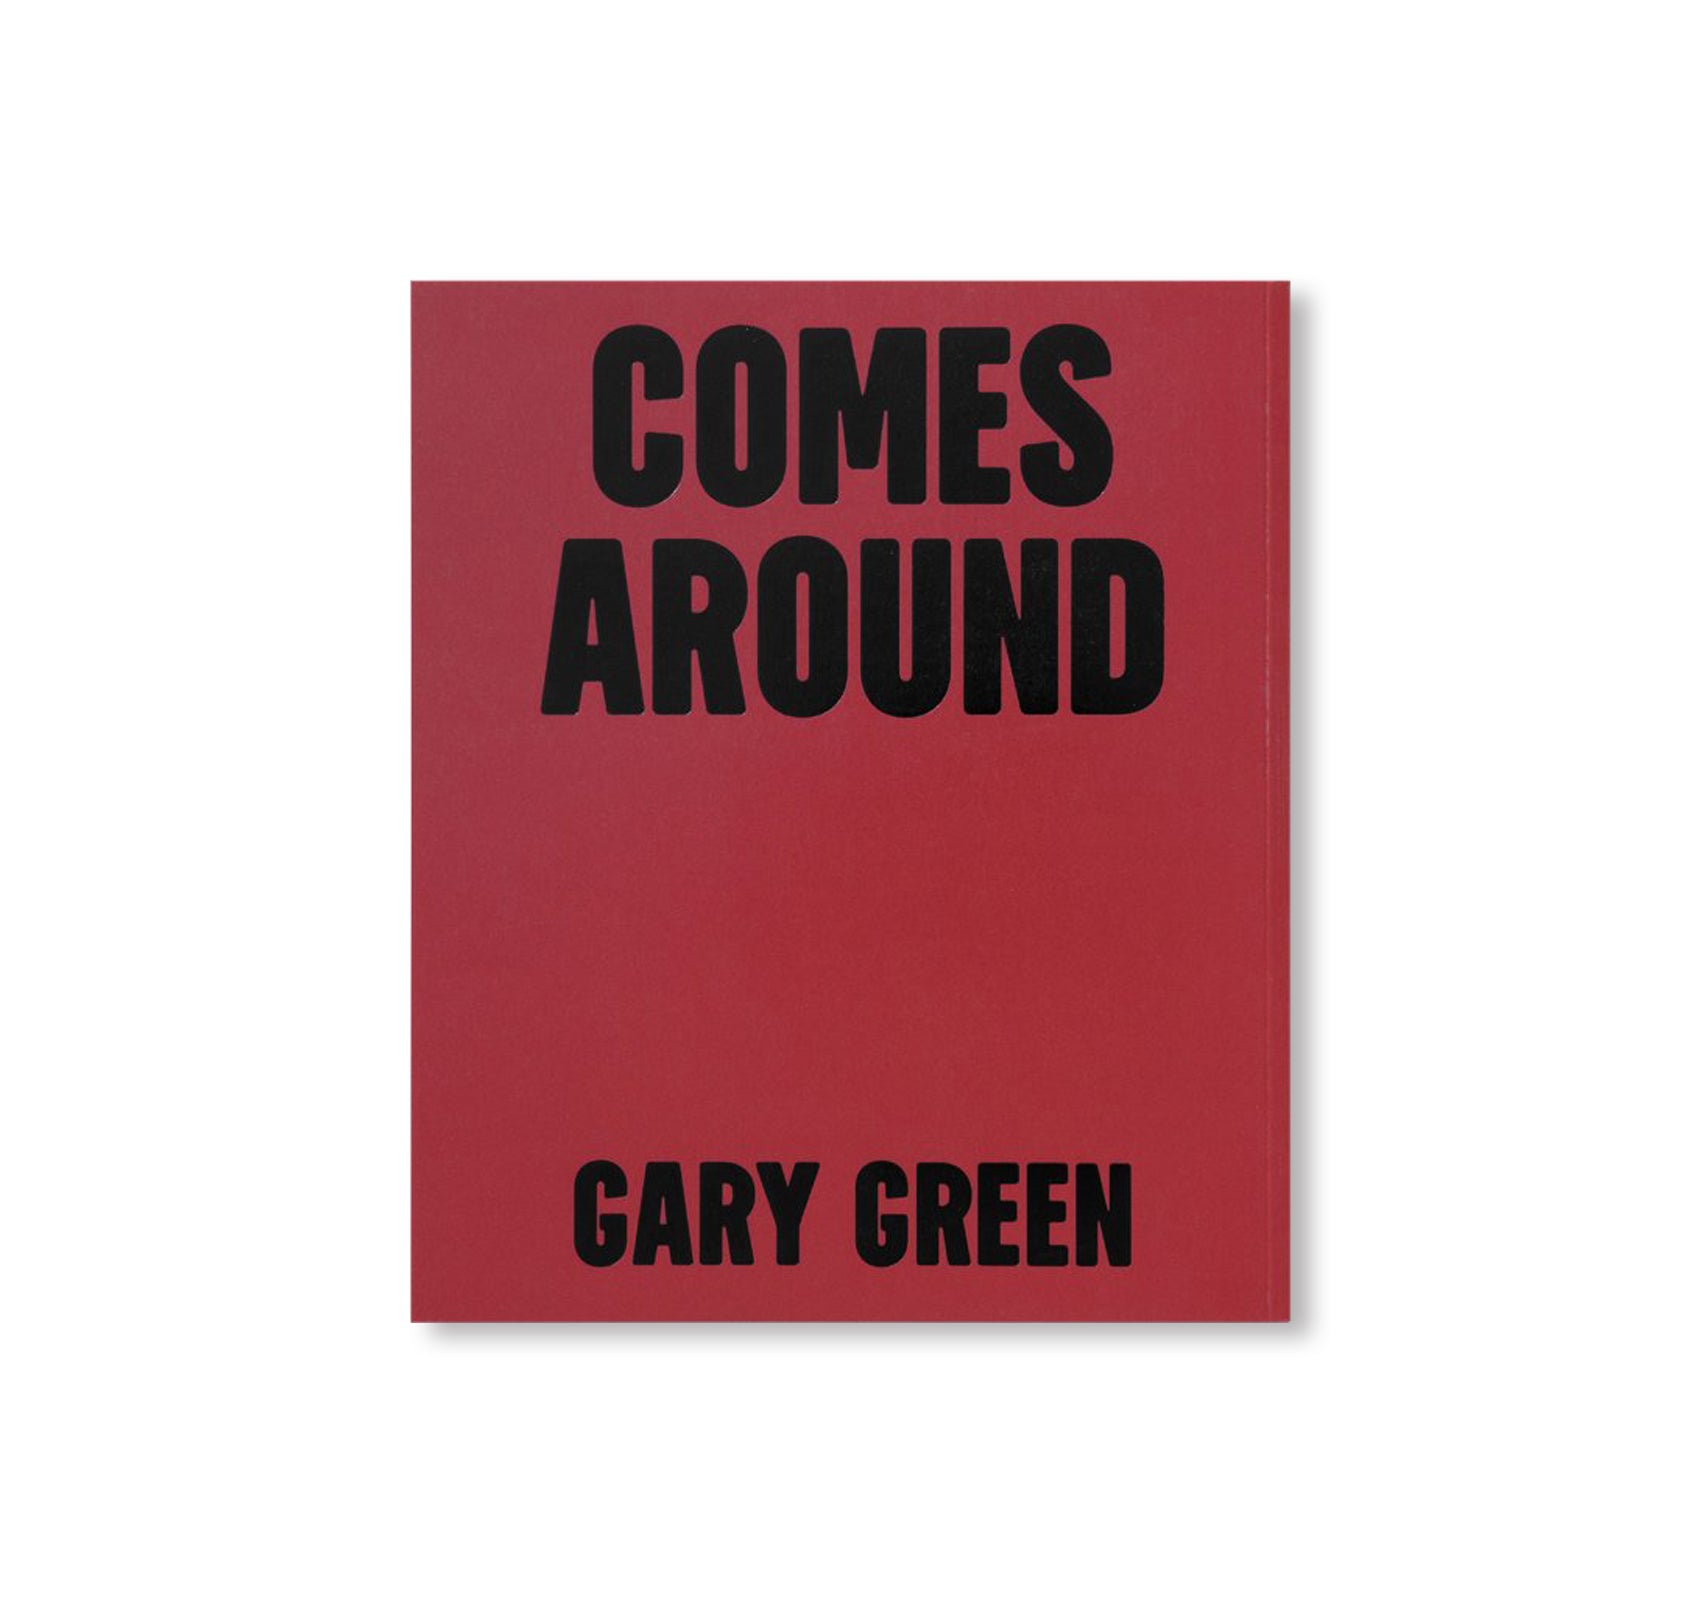 WHEN MIDNIGHT COMES AROUND by Gary Green